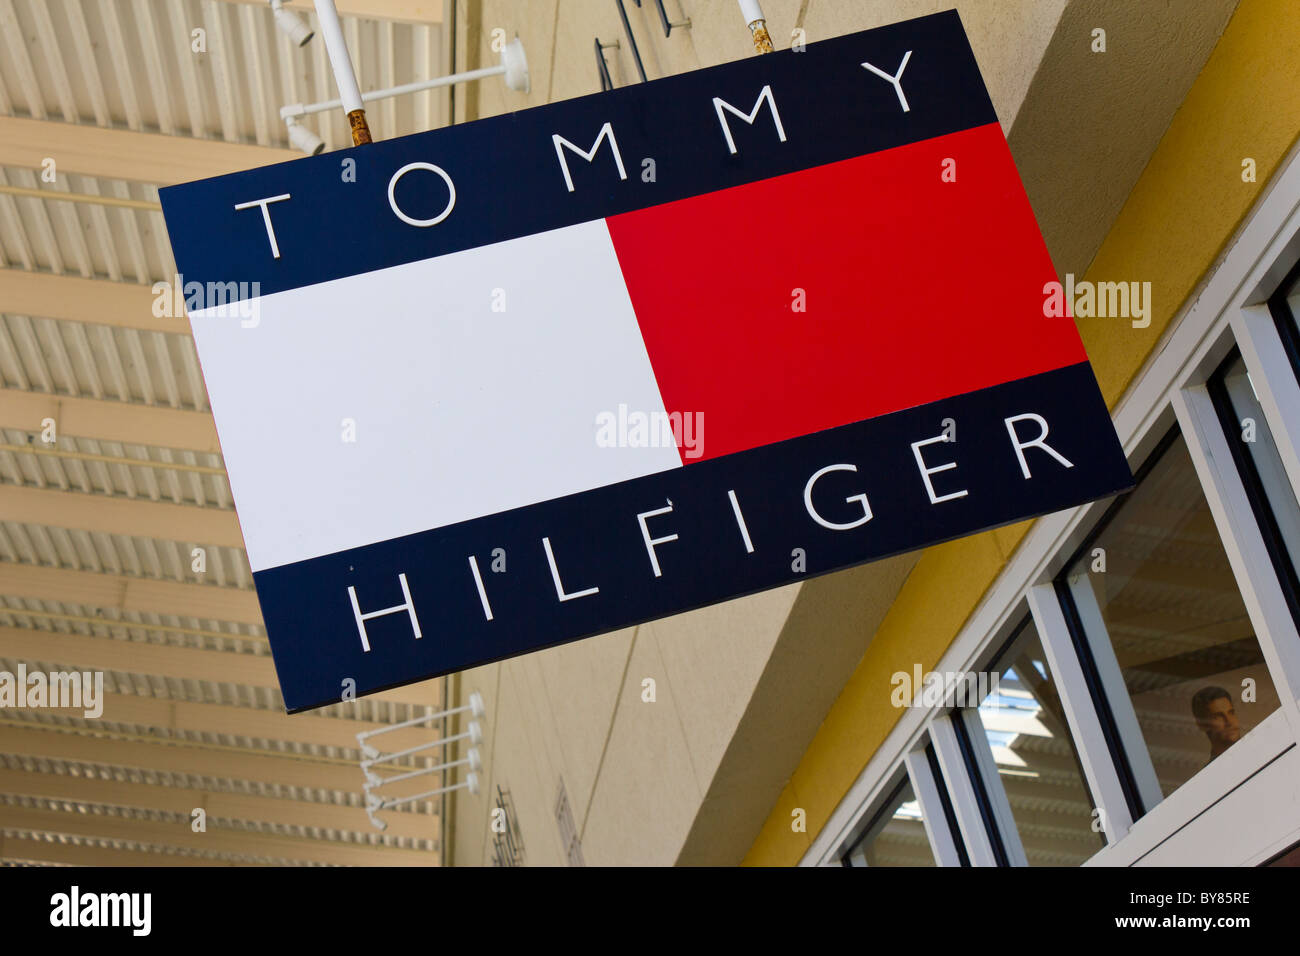 tommy usa outlet